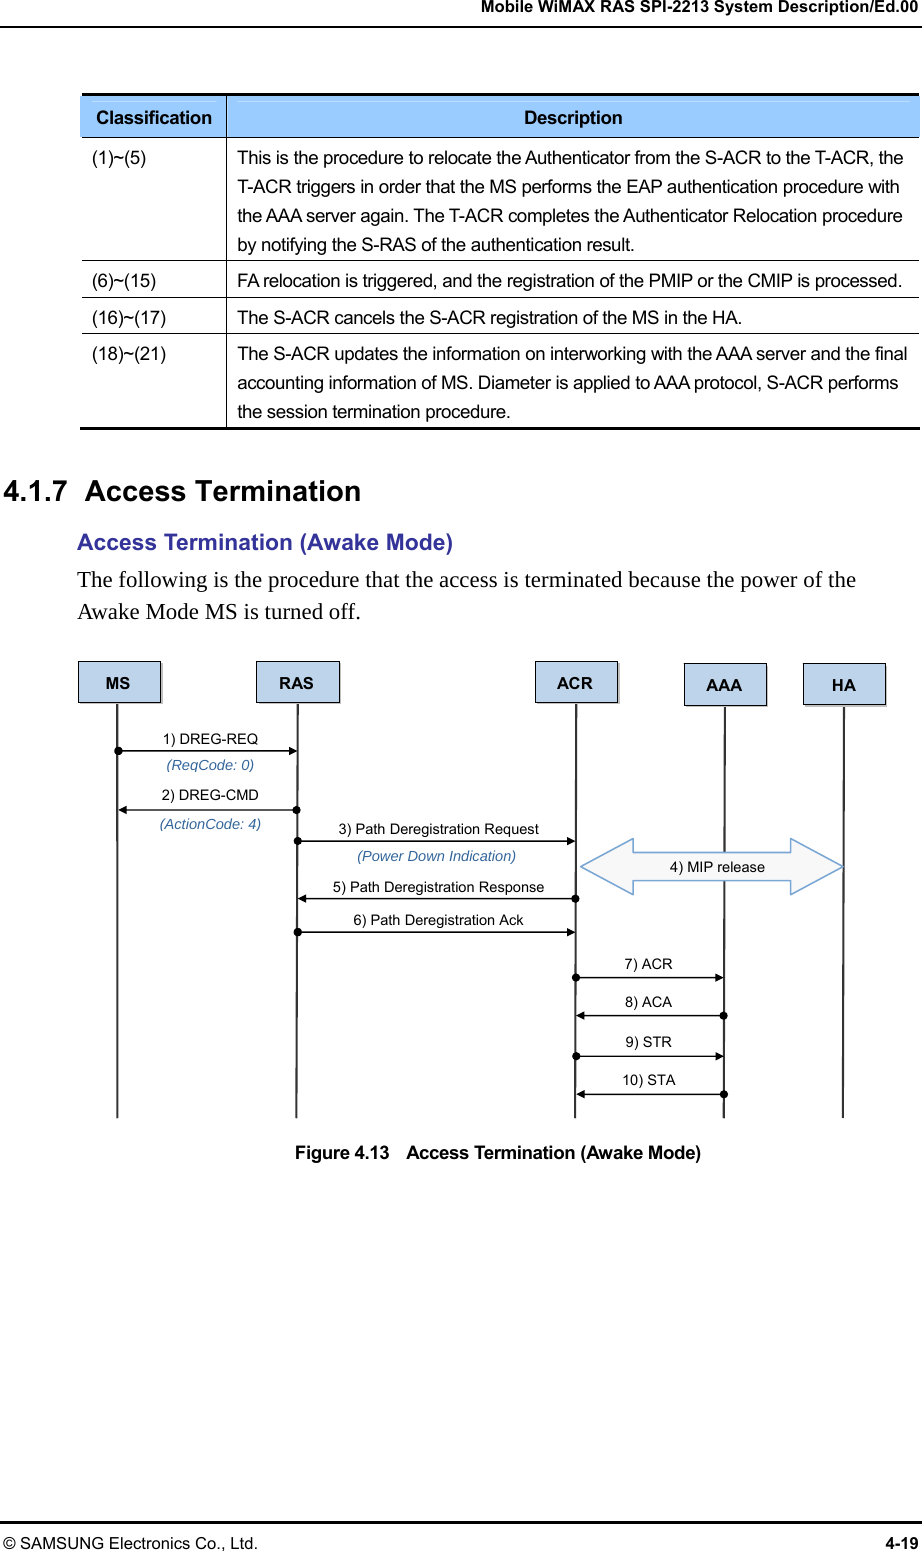   Mobile WiMAX RAS SPI-2213 System Description/Ed.00 © SAMSUNG Electronics Co., Ltd.  4-19  Classification  Description (1)~(5)  This is the procedure to relocate the Authenticator from the S-ACR to the T-ACR, the T-ACR triggers in order that the MS performs the EAP authentication procedure with the AAA server again. The T-ACR completes the Authenticator Relocation procedure by notifying the S-RAS of the authentication result. (6)~(15)  FA relocation is triggered, and the registration of the PMIP or the CMIP is processed.(16)~(17)  The S-ACR cancels the S-ACR registration of the MS in the HA. (18)~(21)  The S-ACR updates the information on interworking with the AAA server and the final accounting information of MS. Diameter is applied to AAA protocol, S-ACR performs the session termination procedure.  4.1.7 Access Termination Access Termination (Awake Mode) The following is the procedure that the access is terminated because the power of the Awake Mode MS is turned off.  Figure 4.13    Access Termination (Awake Mode) MS RAS ACR AAA 1) DREG-REQ (ReqCode: 0) 3) Path Deregistration Request 7) ACR 2) DREG-CMD (ActionCode: 4) (Power Down Indication) 8) ACA 5) Path Deregistration Response 6) Path Deregistration Ack 9) STR 10) STA HA 4) MIP release 